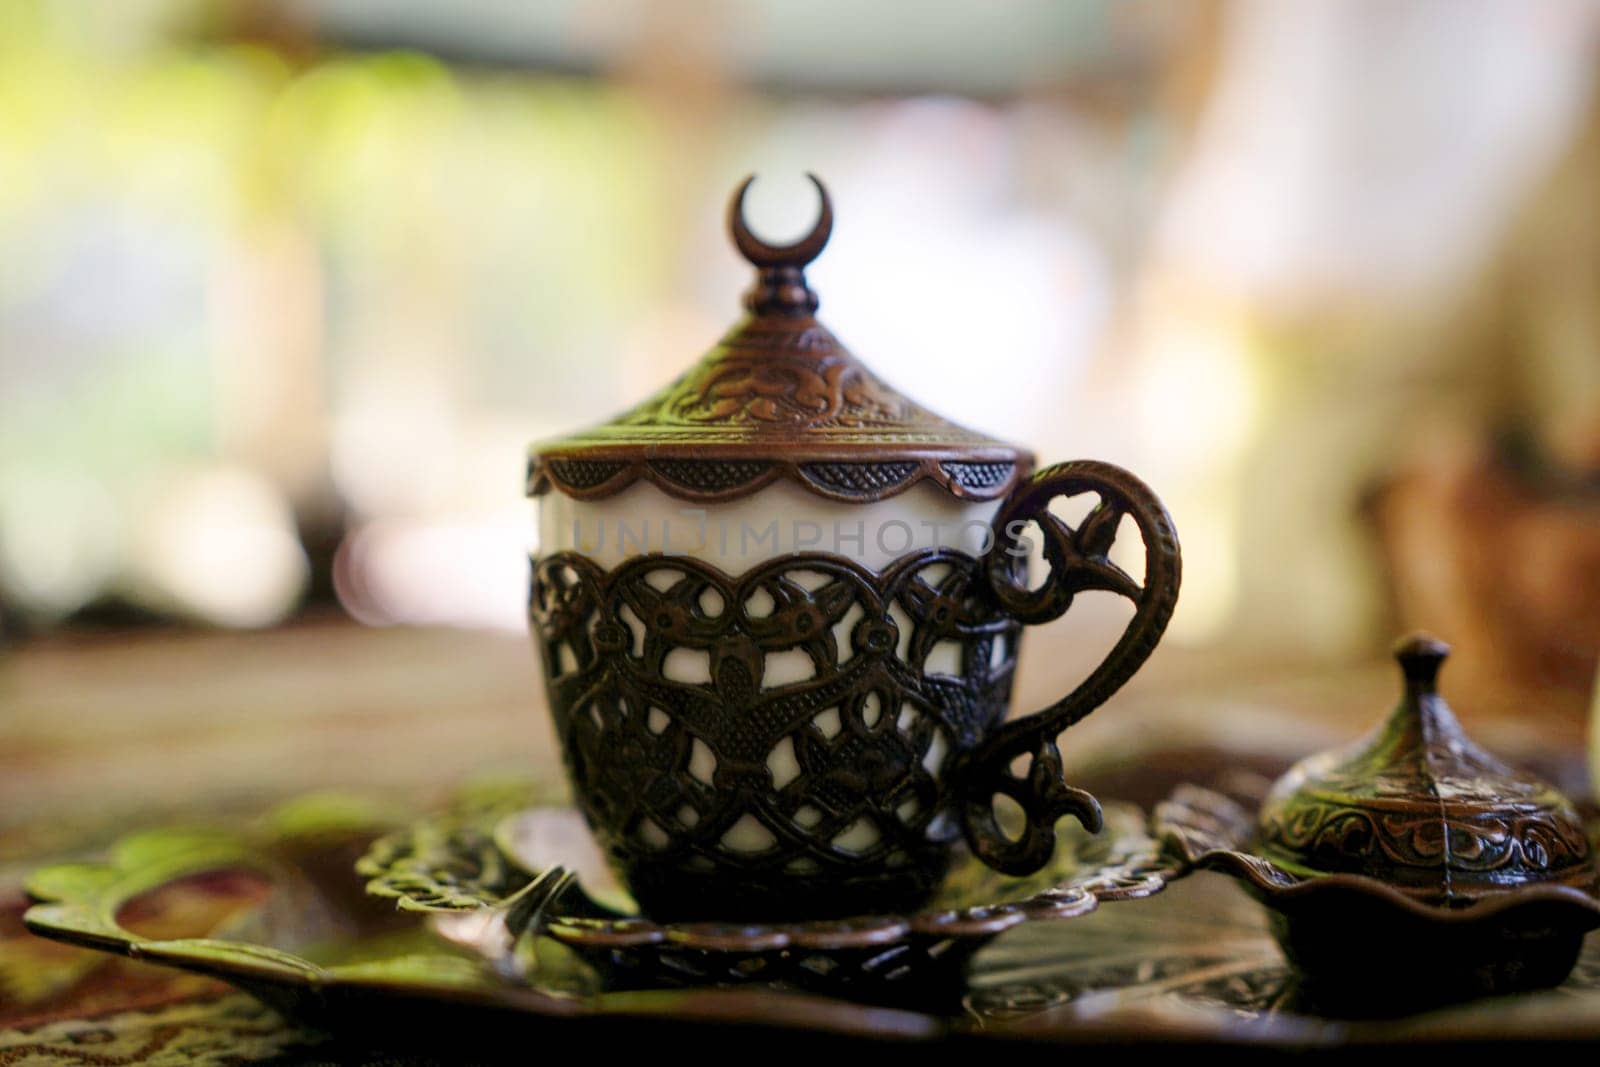 A cup with a crescent moon on top sits on a tray. The cup is made of metal and has a white base. The scene is peaceful and serene